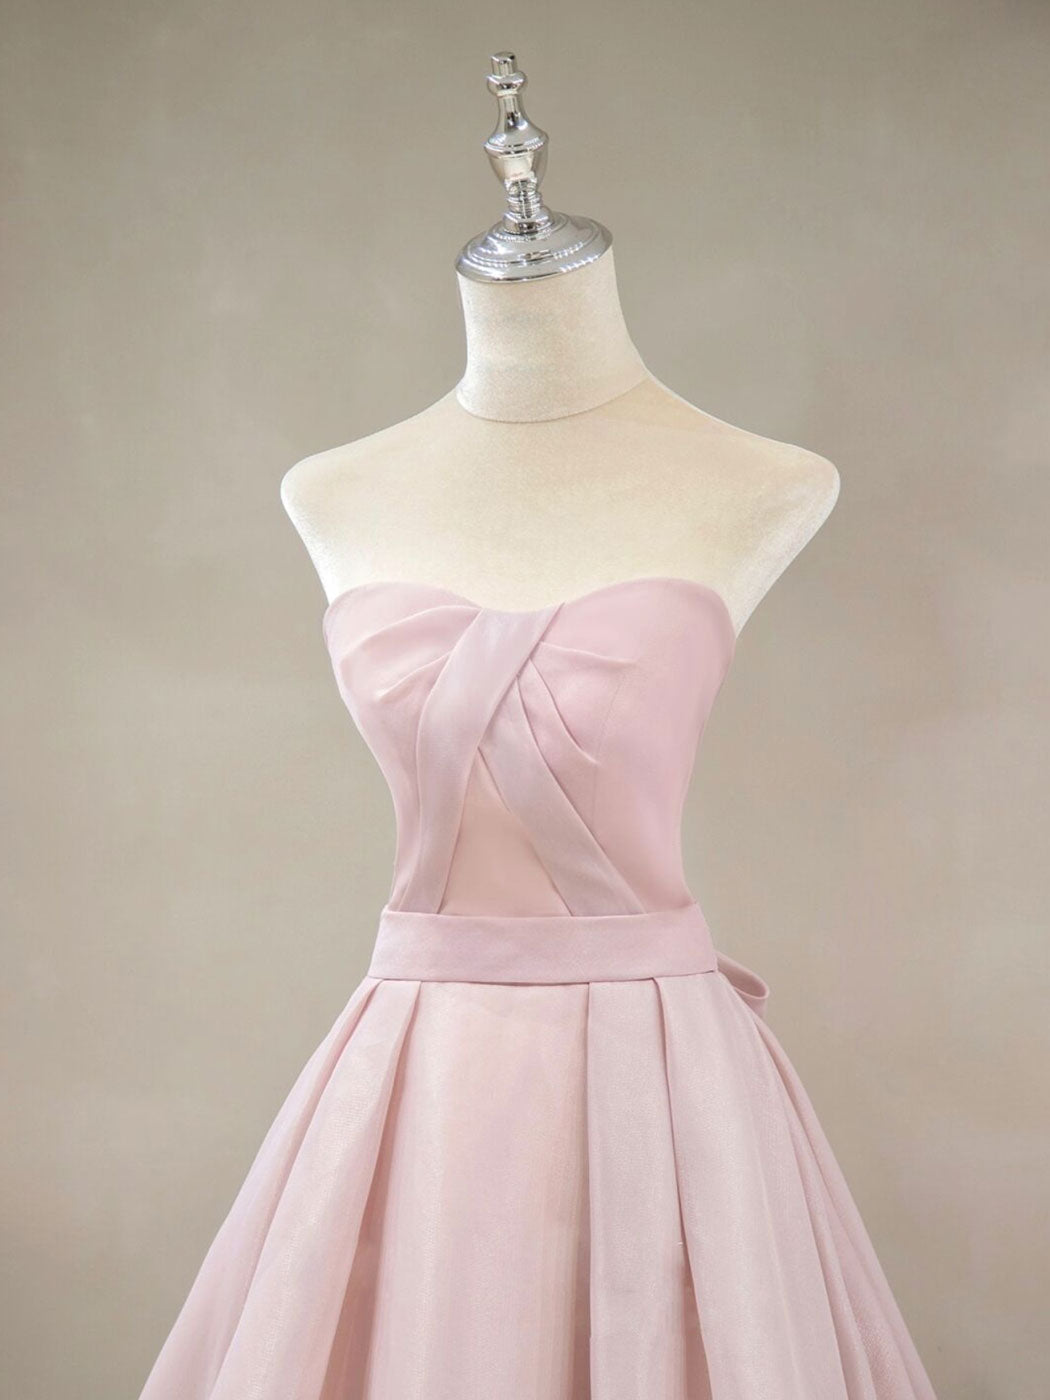 Prom Dress Long Sleeve, A Line Pink Long Prom Dresses, Formal Pink Bridesmaid Dresses